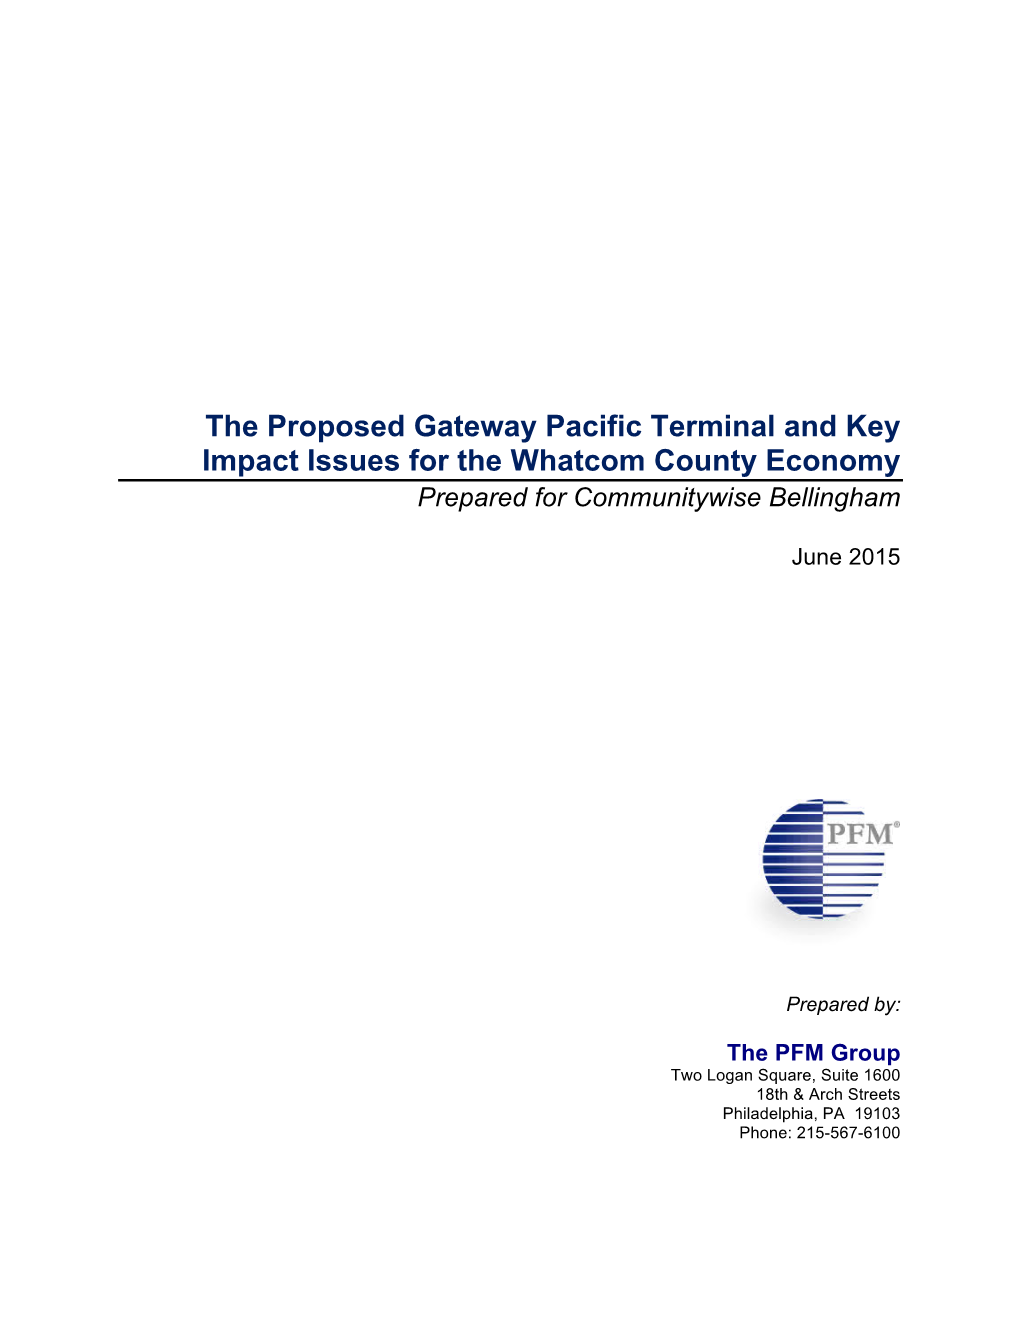 The Proposed Gateway Pacific Terminal and Key Impact Issues for the Whatcom County Economy Prepared for Communitywise Bellingham